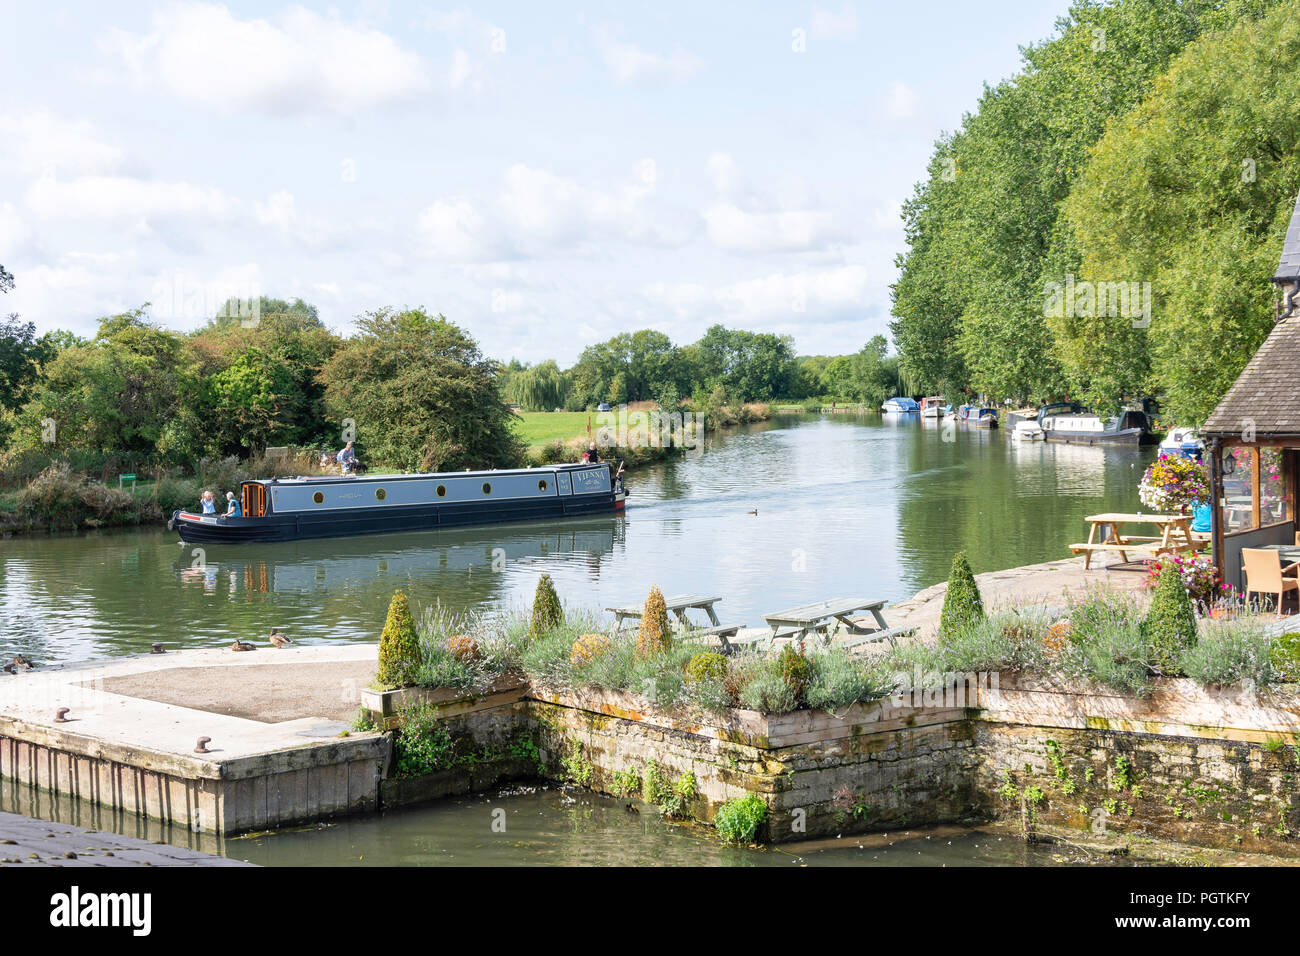 Tamise, le Riverside, Lechlade-on-Thames, Gloucestershire, Angleterre, Royaume-Uni Banque D'Images